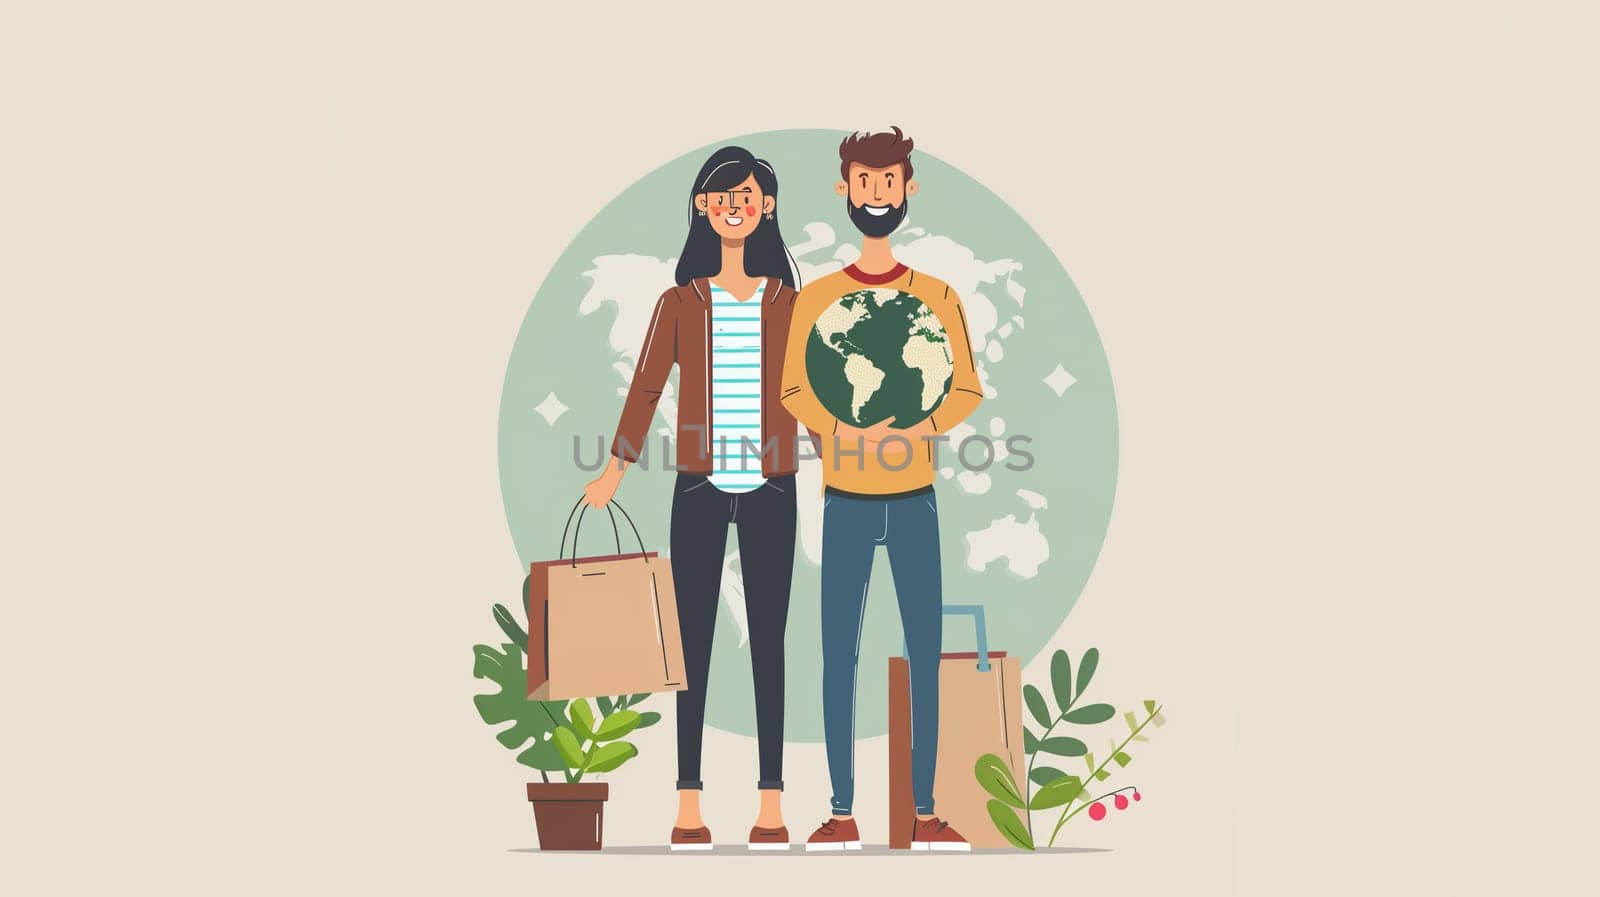 A young man and woman stand side by side, the man cradling a small globe to signify their care for the Earth. They are surrounded by symbols of a sustainable lifestyle, including a reusable shopping bag, potted plant, and gardening tools, highlighting their commitment to environmentally friendly practices on Earth Day.